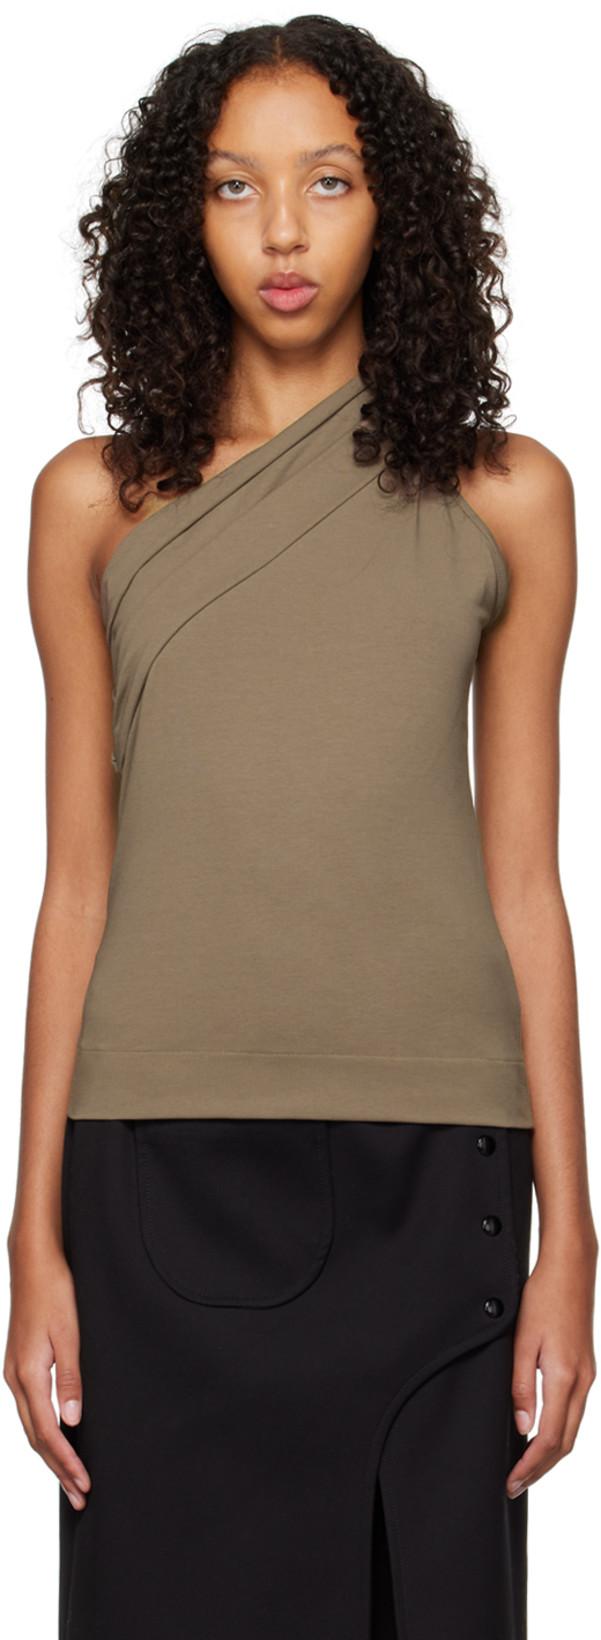 SSENSE Exclusive Taupe Tank Top by CAES